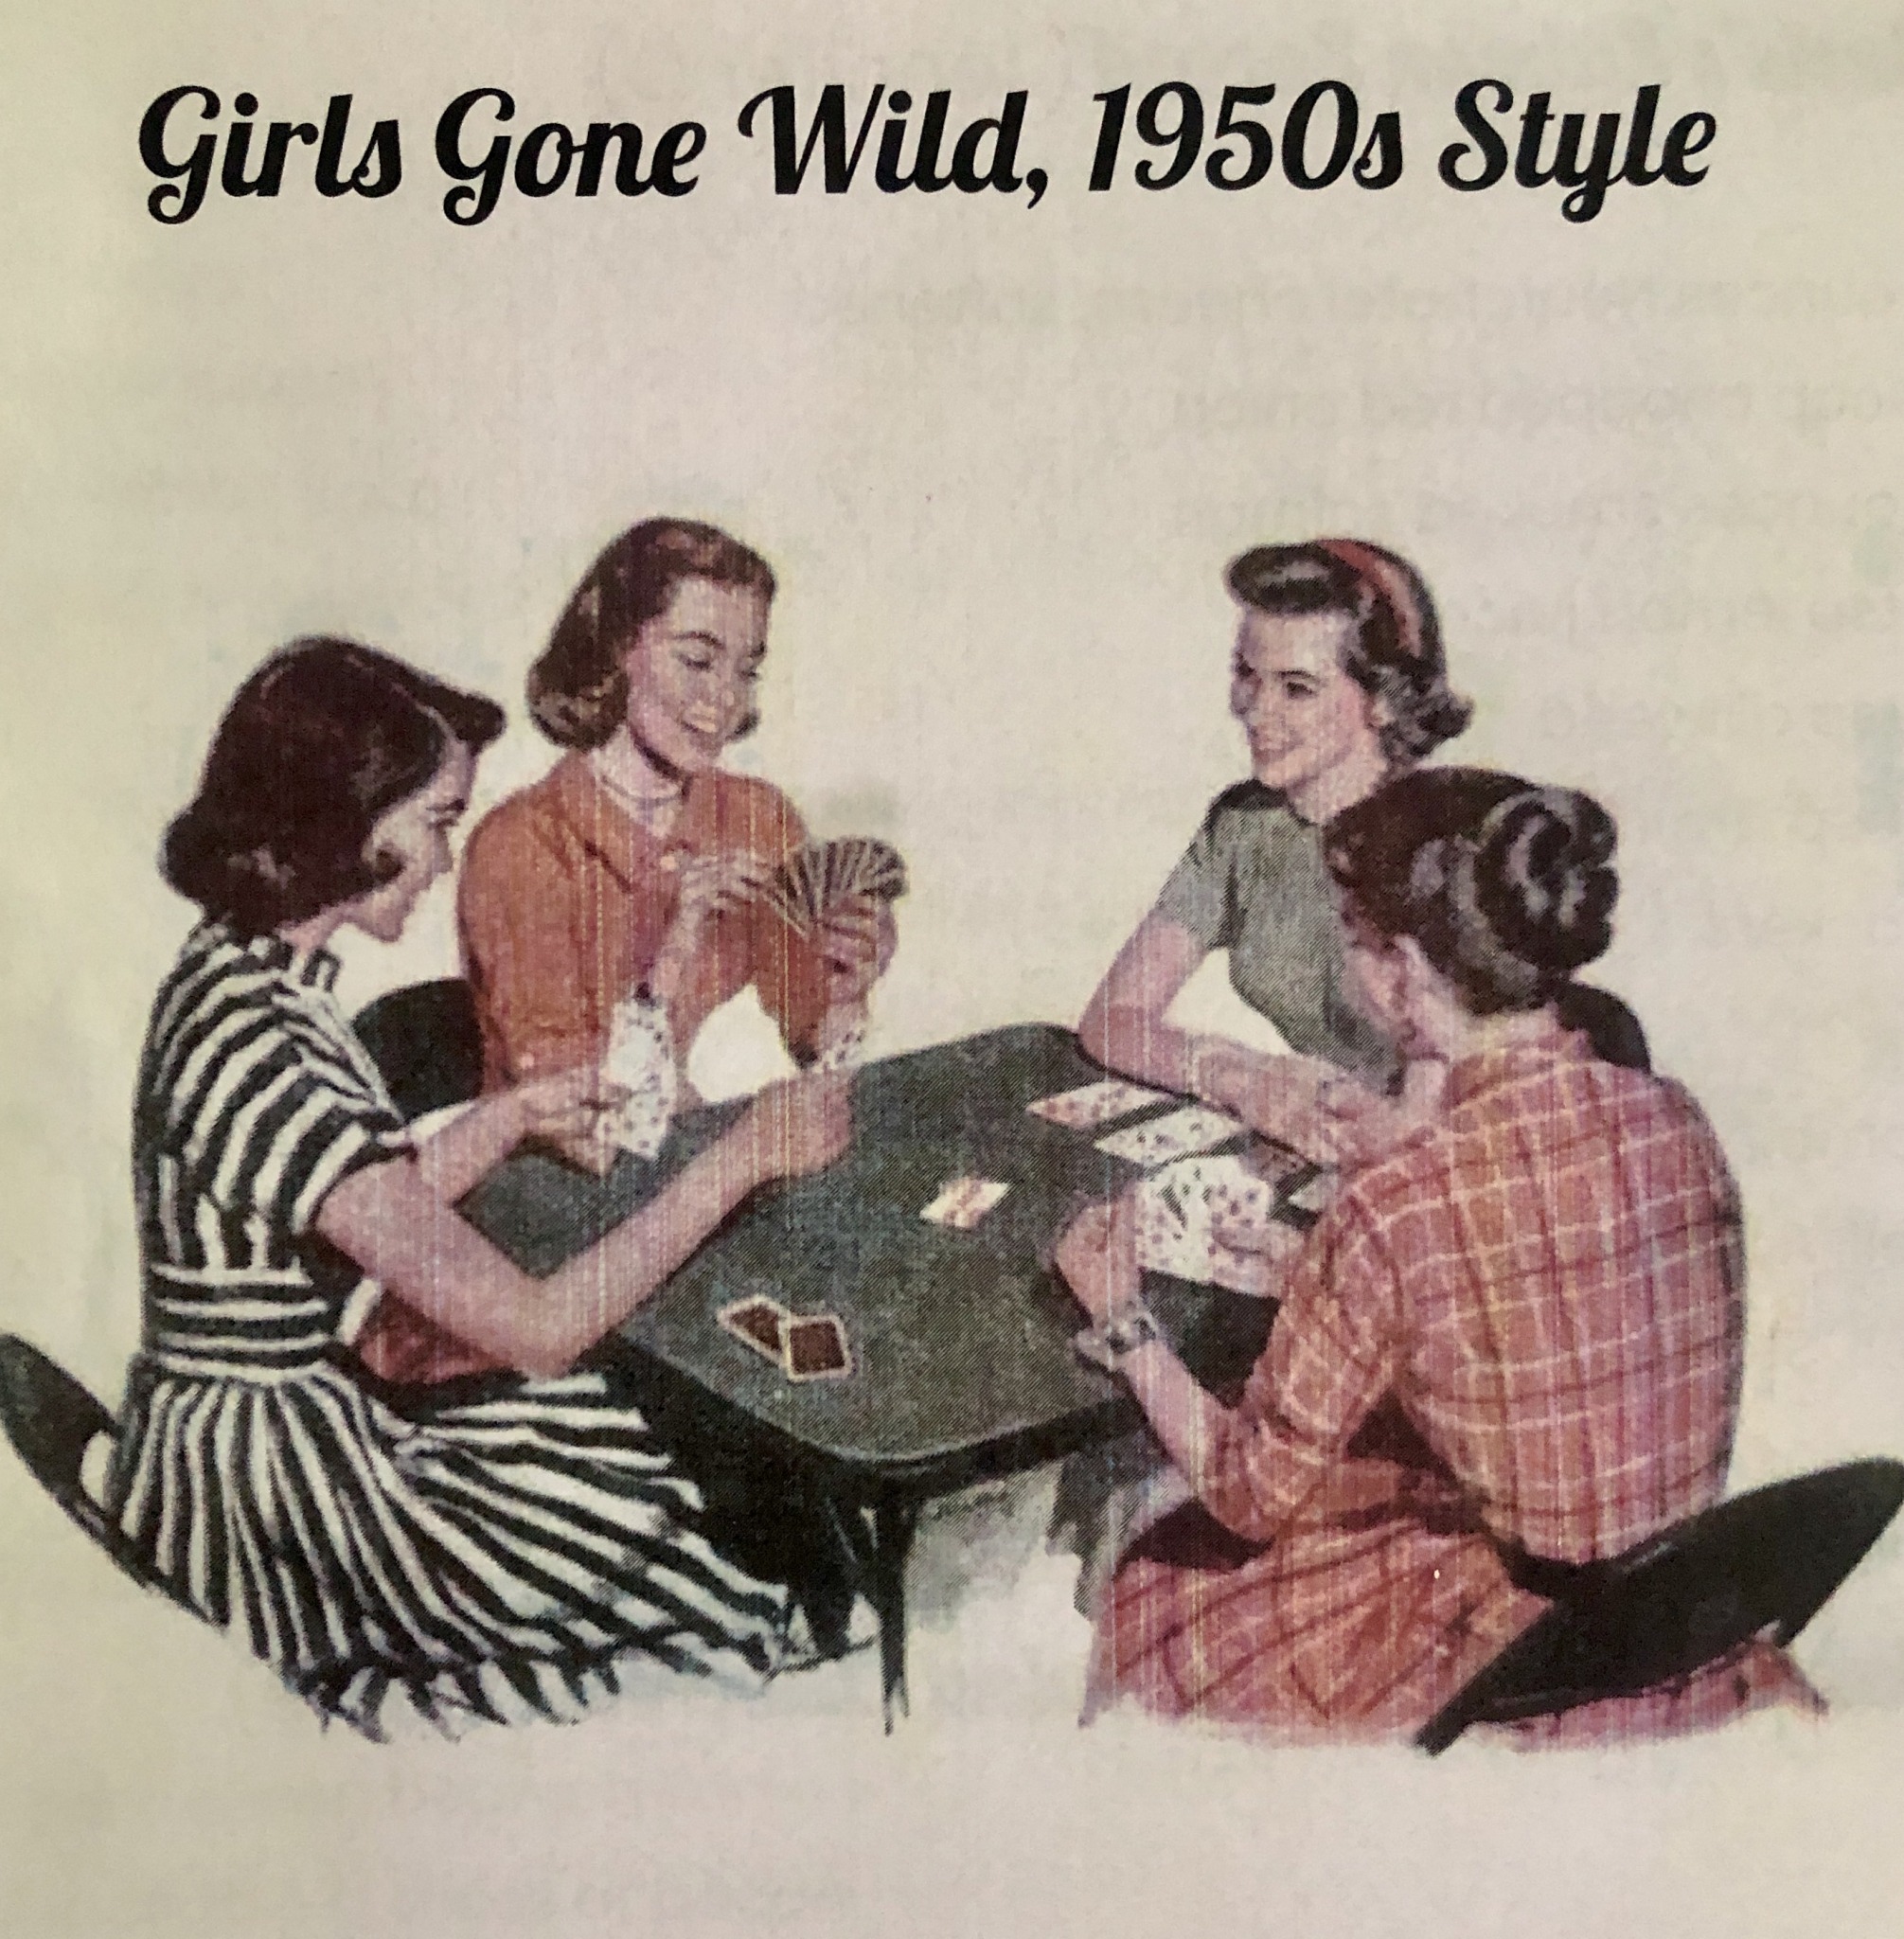 1950s retro card playing image